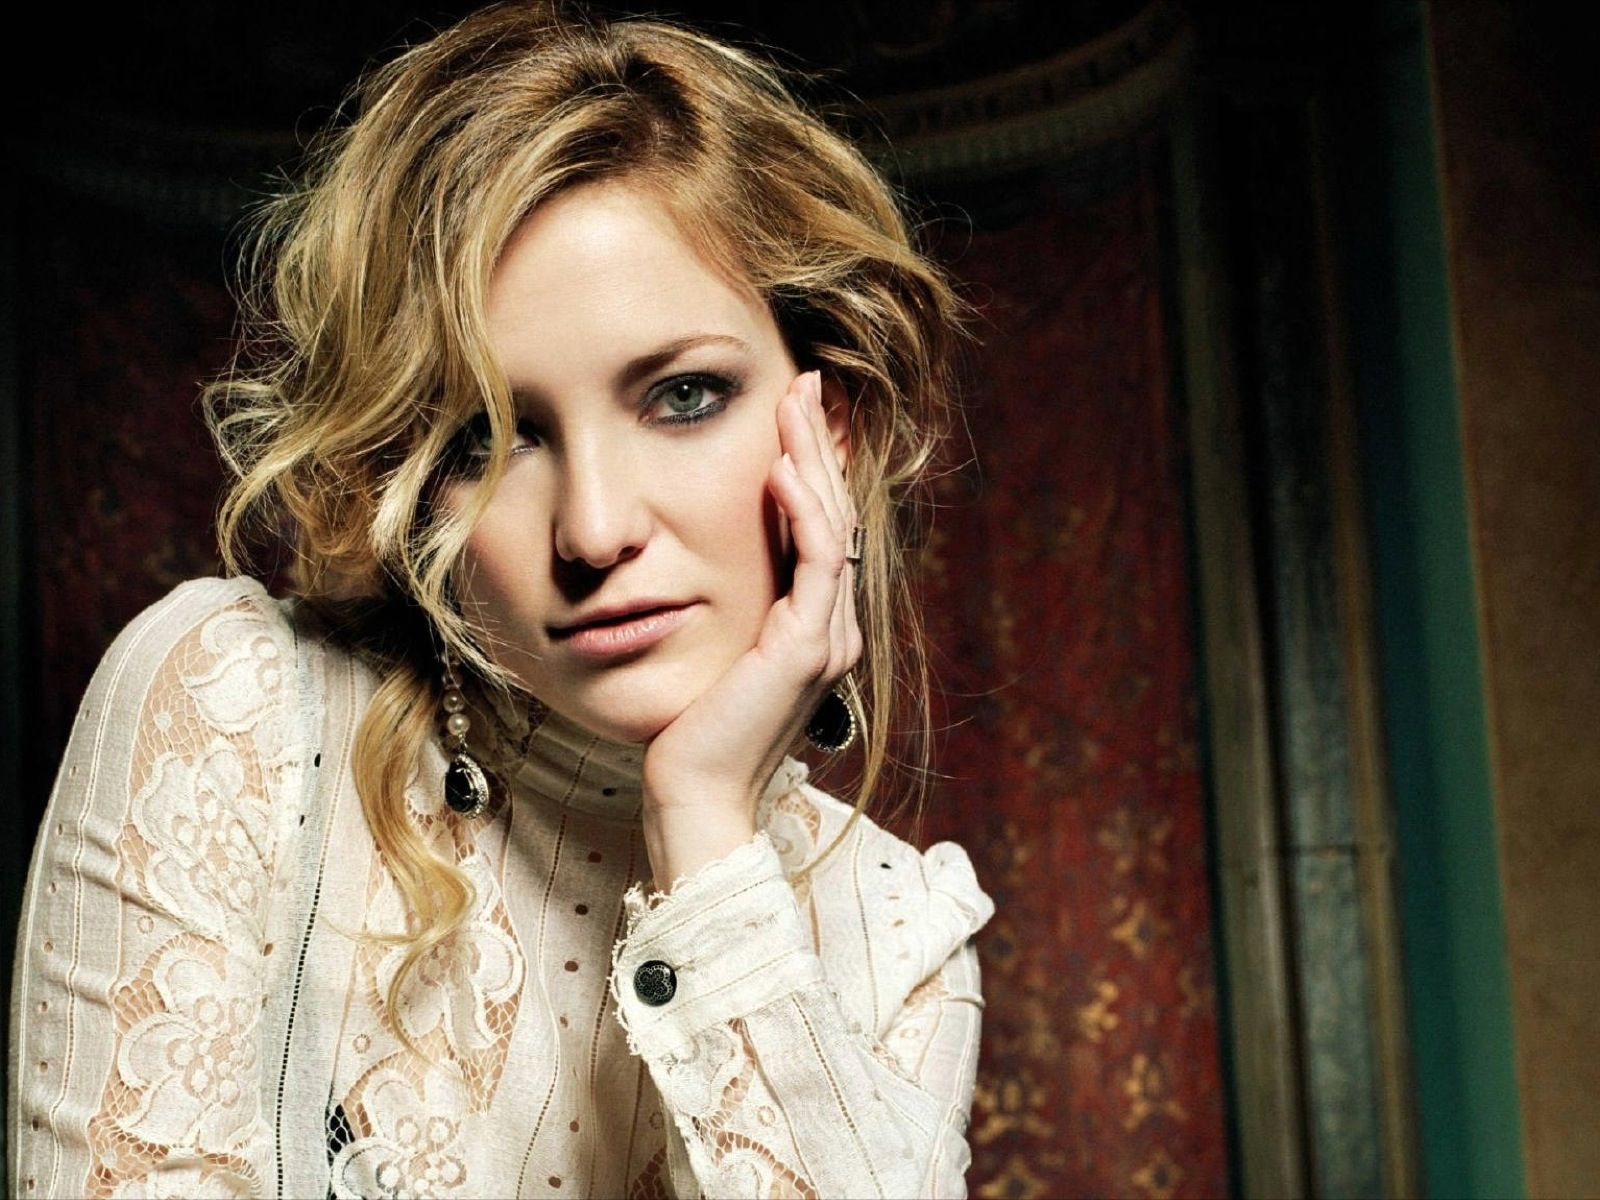 Kate Hudson New Images Wallpapers